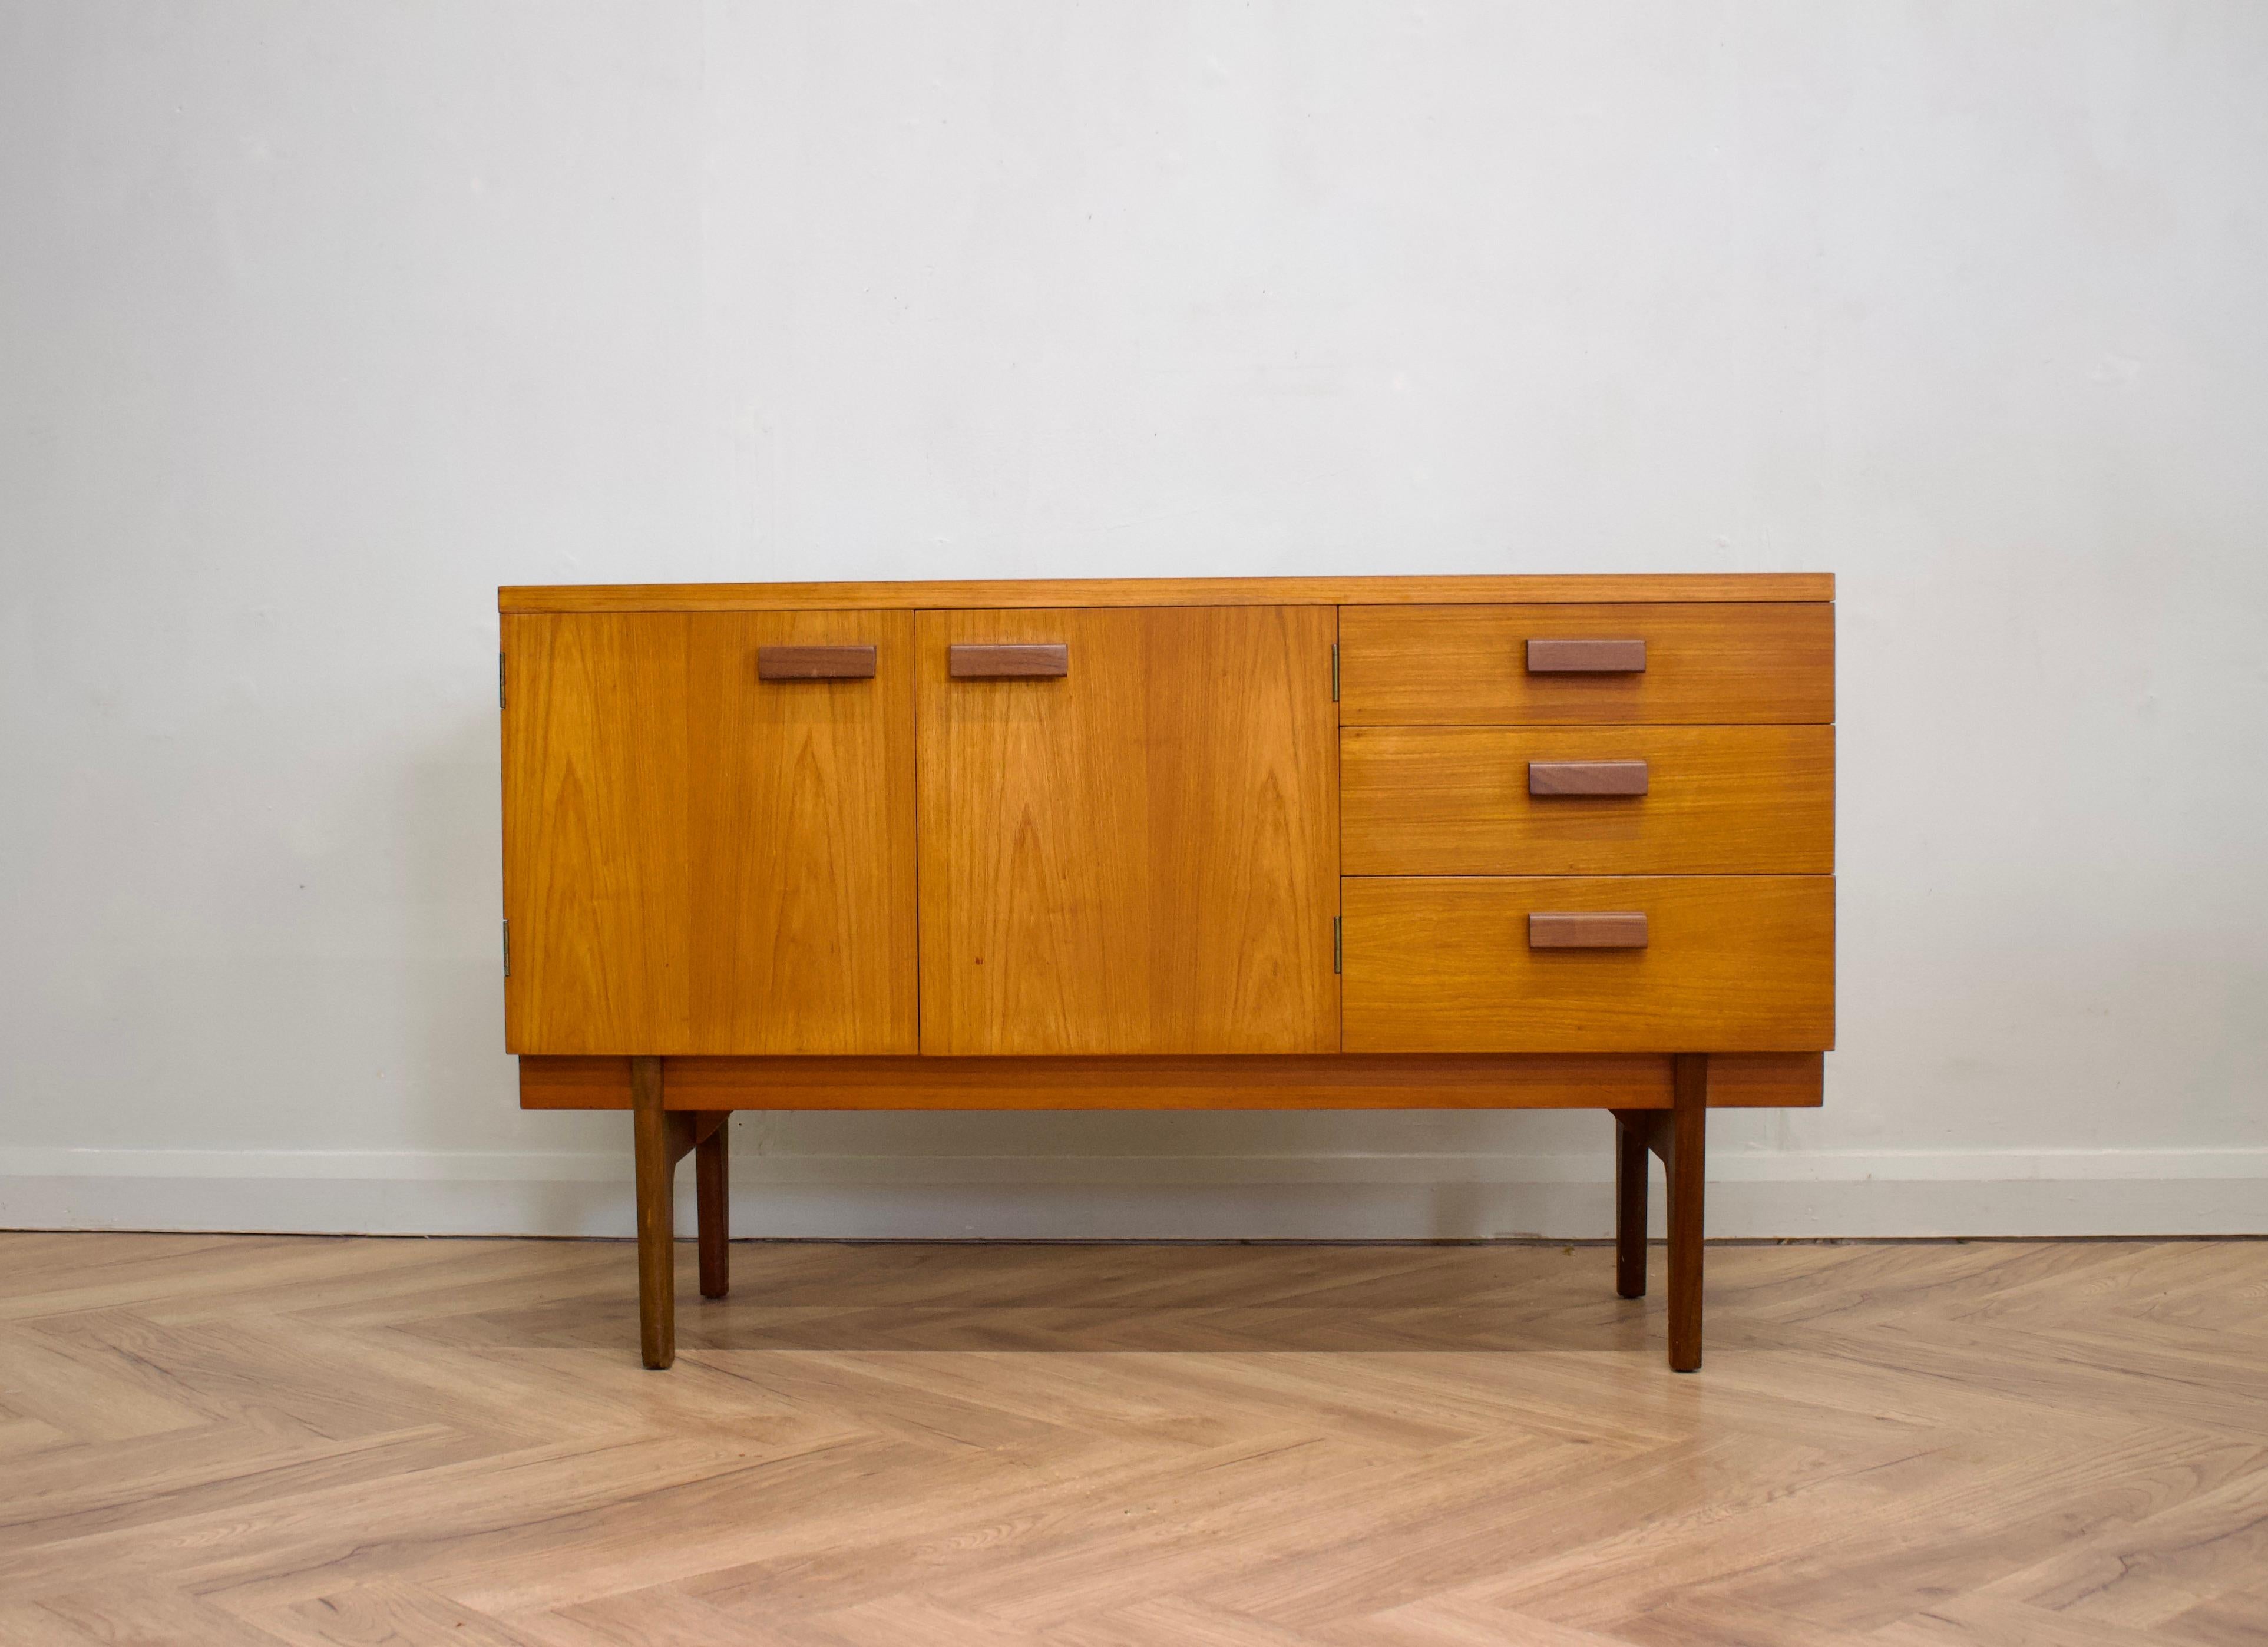 - Mid century modern sideboard.
- Featuring a cupboard and three drawers
- Manufactured in the UK by Uniflex
- Made from teak and teak veneer.